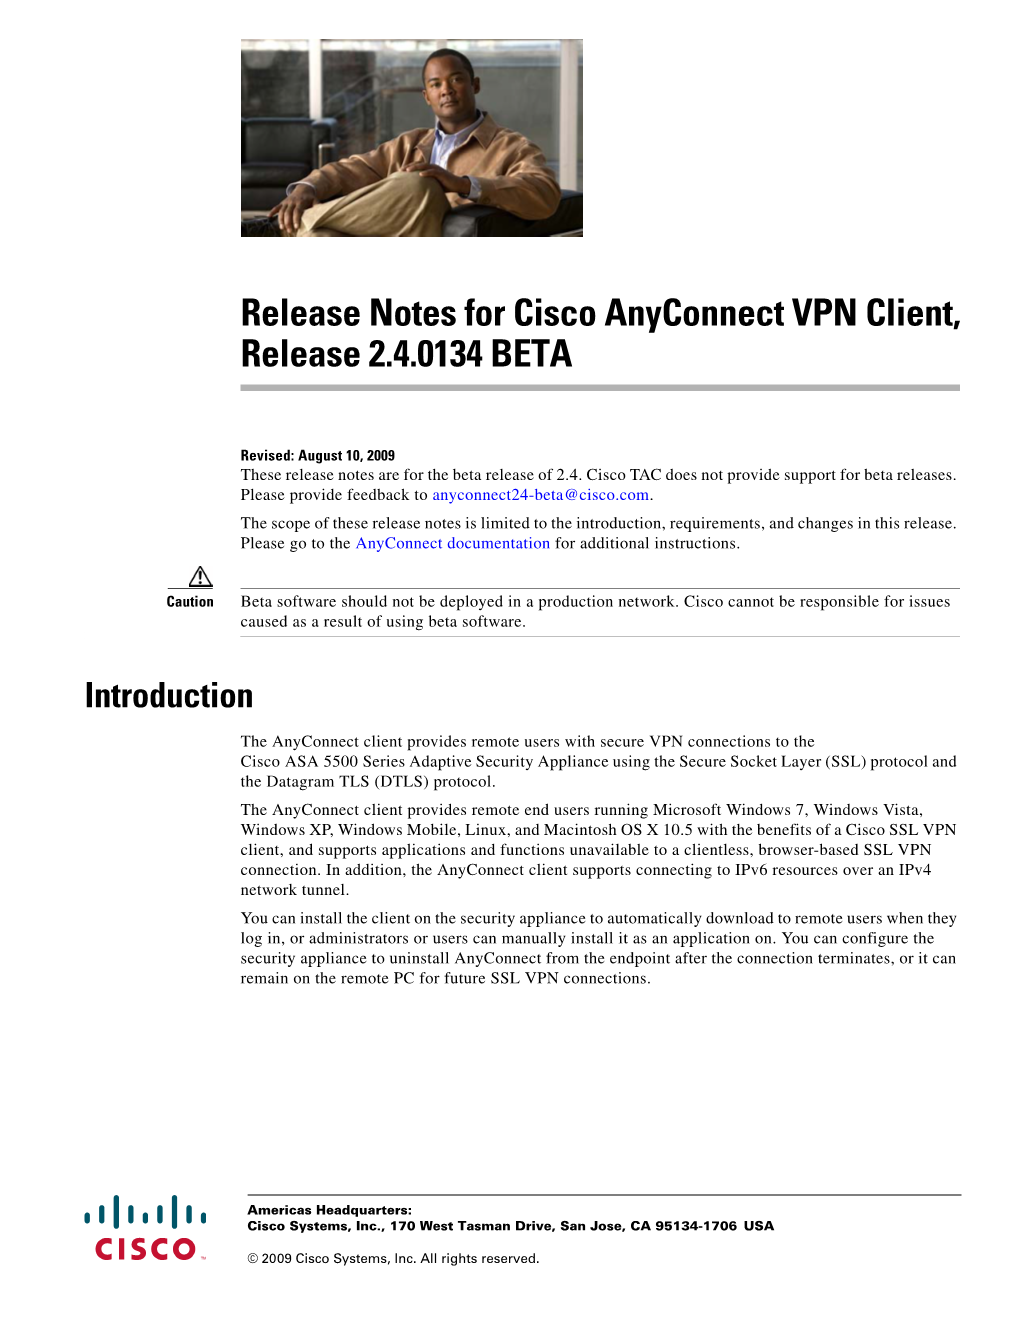 Release Notes for Cisco Anyconnect VPN Client, Release 2.4.0134 BETA